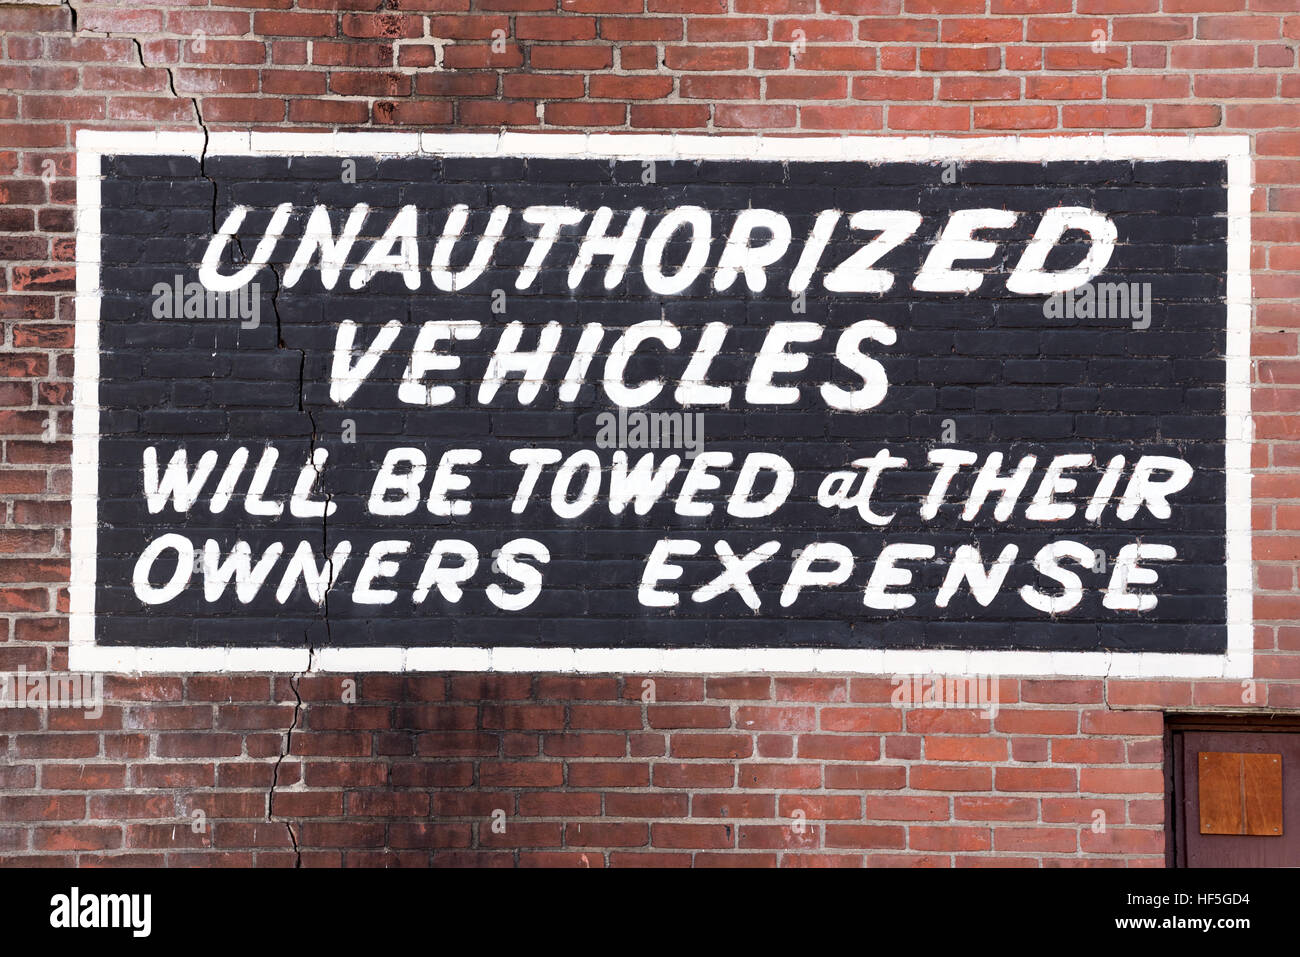 Unauthorized vehicles sign painted onto a brick wall in Brattleboro, Vermont. Stock Photo